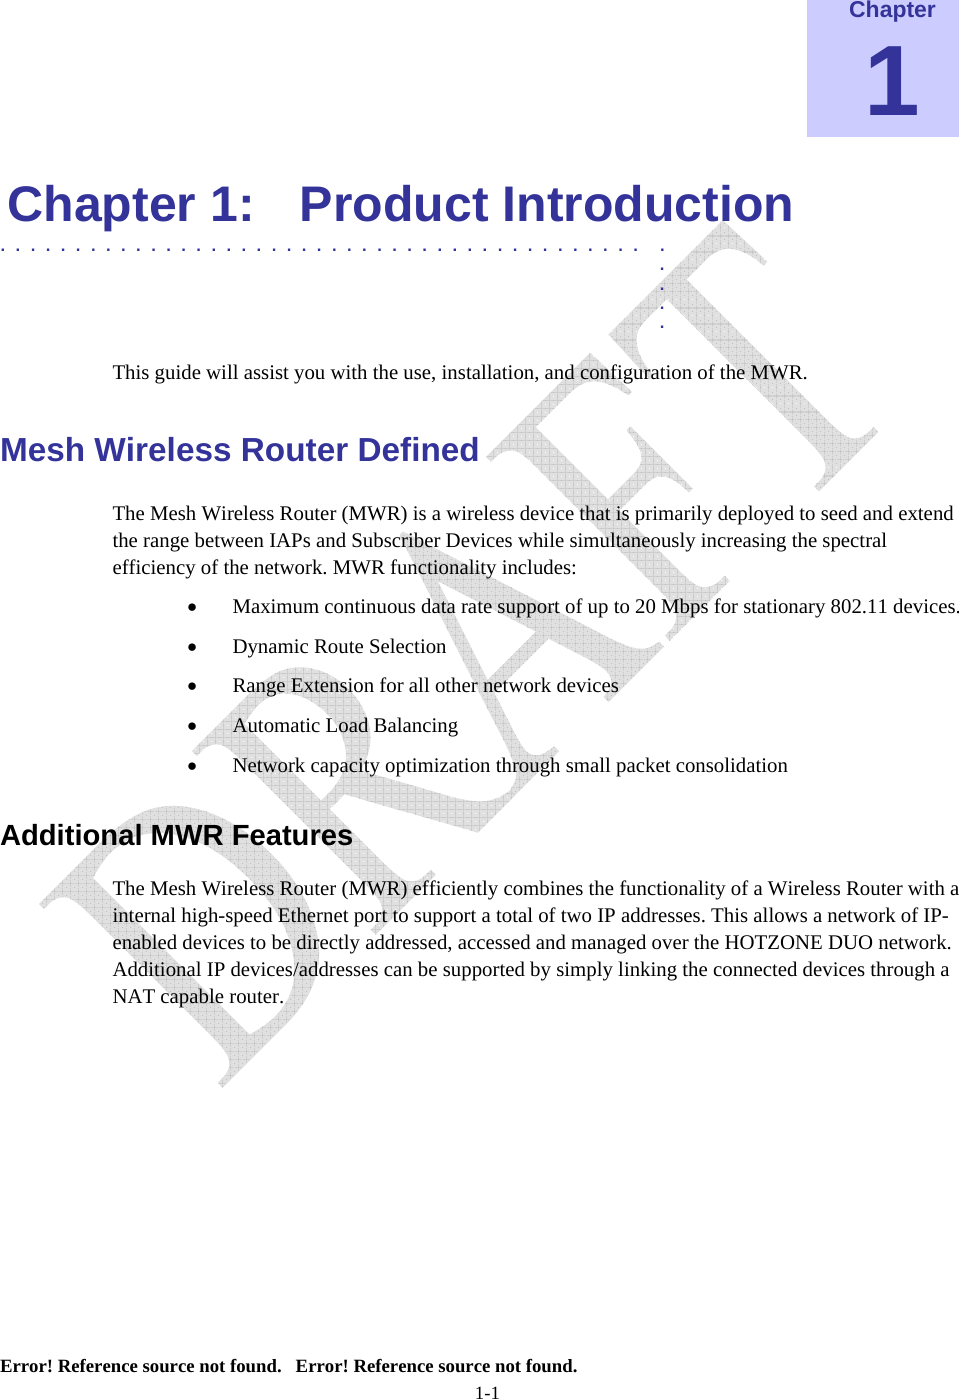  Error! Reference source not found.   Error! Reference source not found. 1-1 Chapter 1 Chapter 1:  Product Introduction  ........................................... .  .  .  .  . This guide will assist you with the use, installation, and configuration of the MWR. Mesh Wireless Router Defined The Mesh Wireless Router (MWR) is a wireless device that is primarily deployed to seed and extend the range between IAPs and Subscriber Devices while simultaneously increasing the spectral efficiency of the network. MWR functionality includes: • Maximum continuous data rate support of up to 20 Mbps for stationary 802.11 devices. • Dynamic Route Selection • Range Extension for all other network devices • Automatic Load Balancing • Network capacity optimization through small packet consolidation Additional MWR Features The Mesh Wireless Router (MWR) efficiently combines the functionality of a Wireless Router with a internal high-speed Ethernet port to support a total of two IP addresses. This allows a network of IP-enabled devices to be directly addressed, accessed and managed over the HOTZONE DUO network. Additional IP devices/addresses can be supported by simply linking the connected devices through a NAT capable router.      